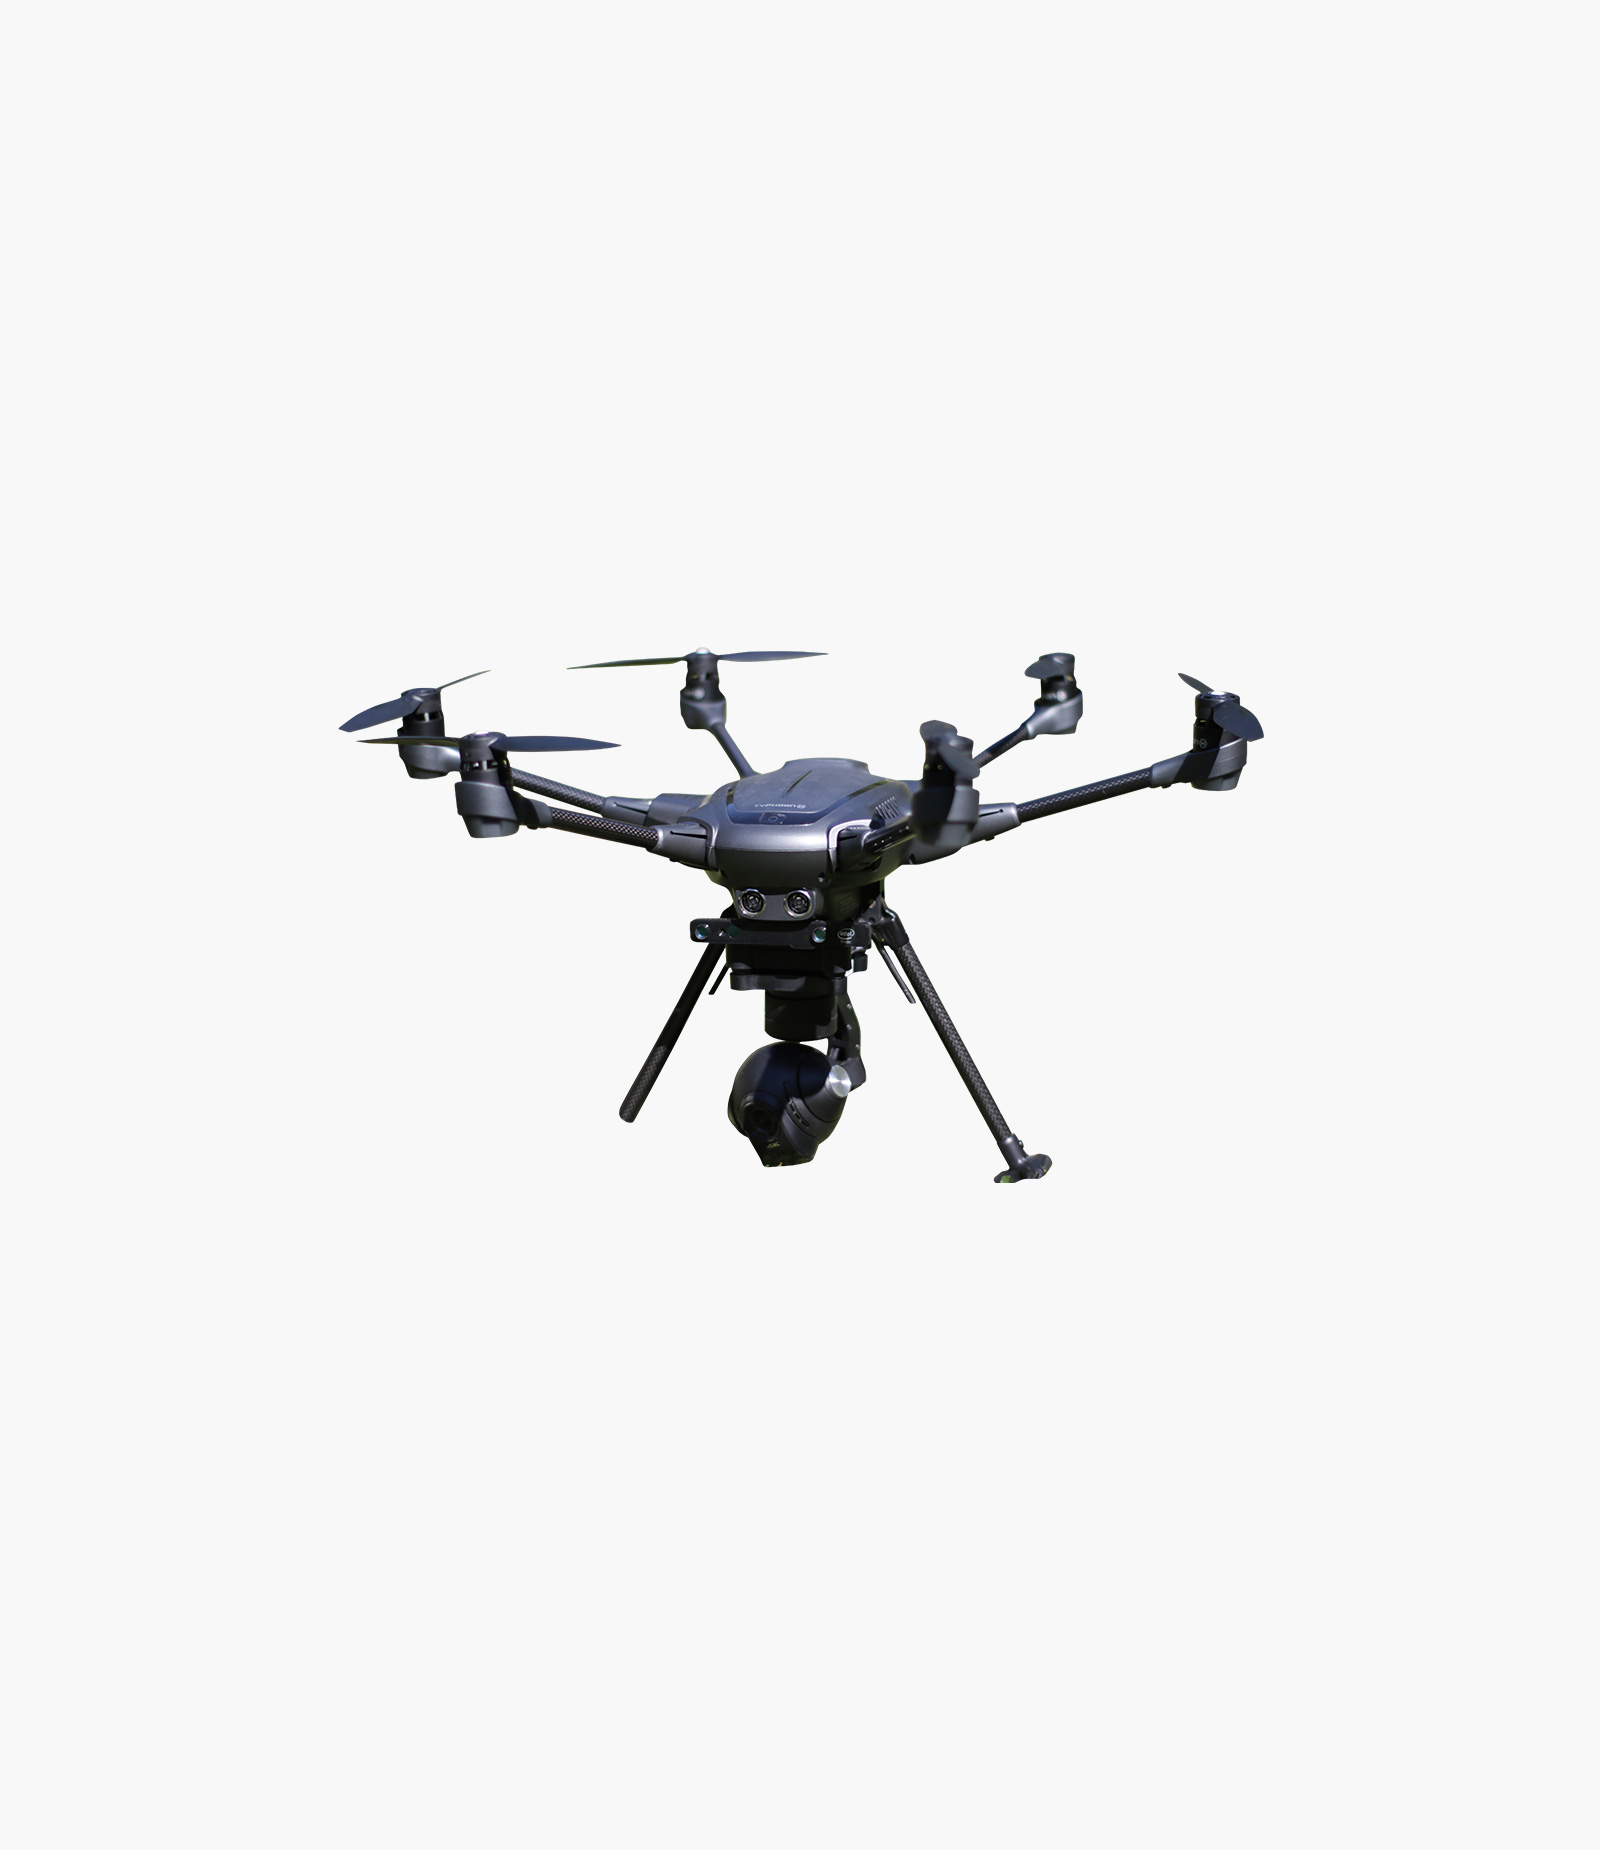 Yuneec Typhoon-H Hexacopter Drone with 4K UHD Camera